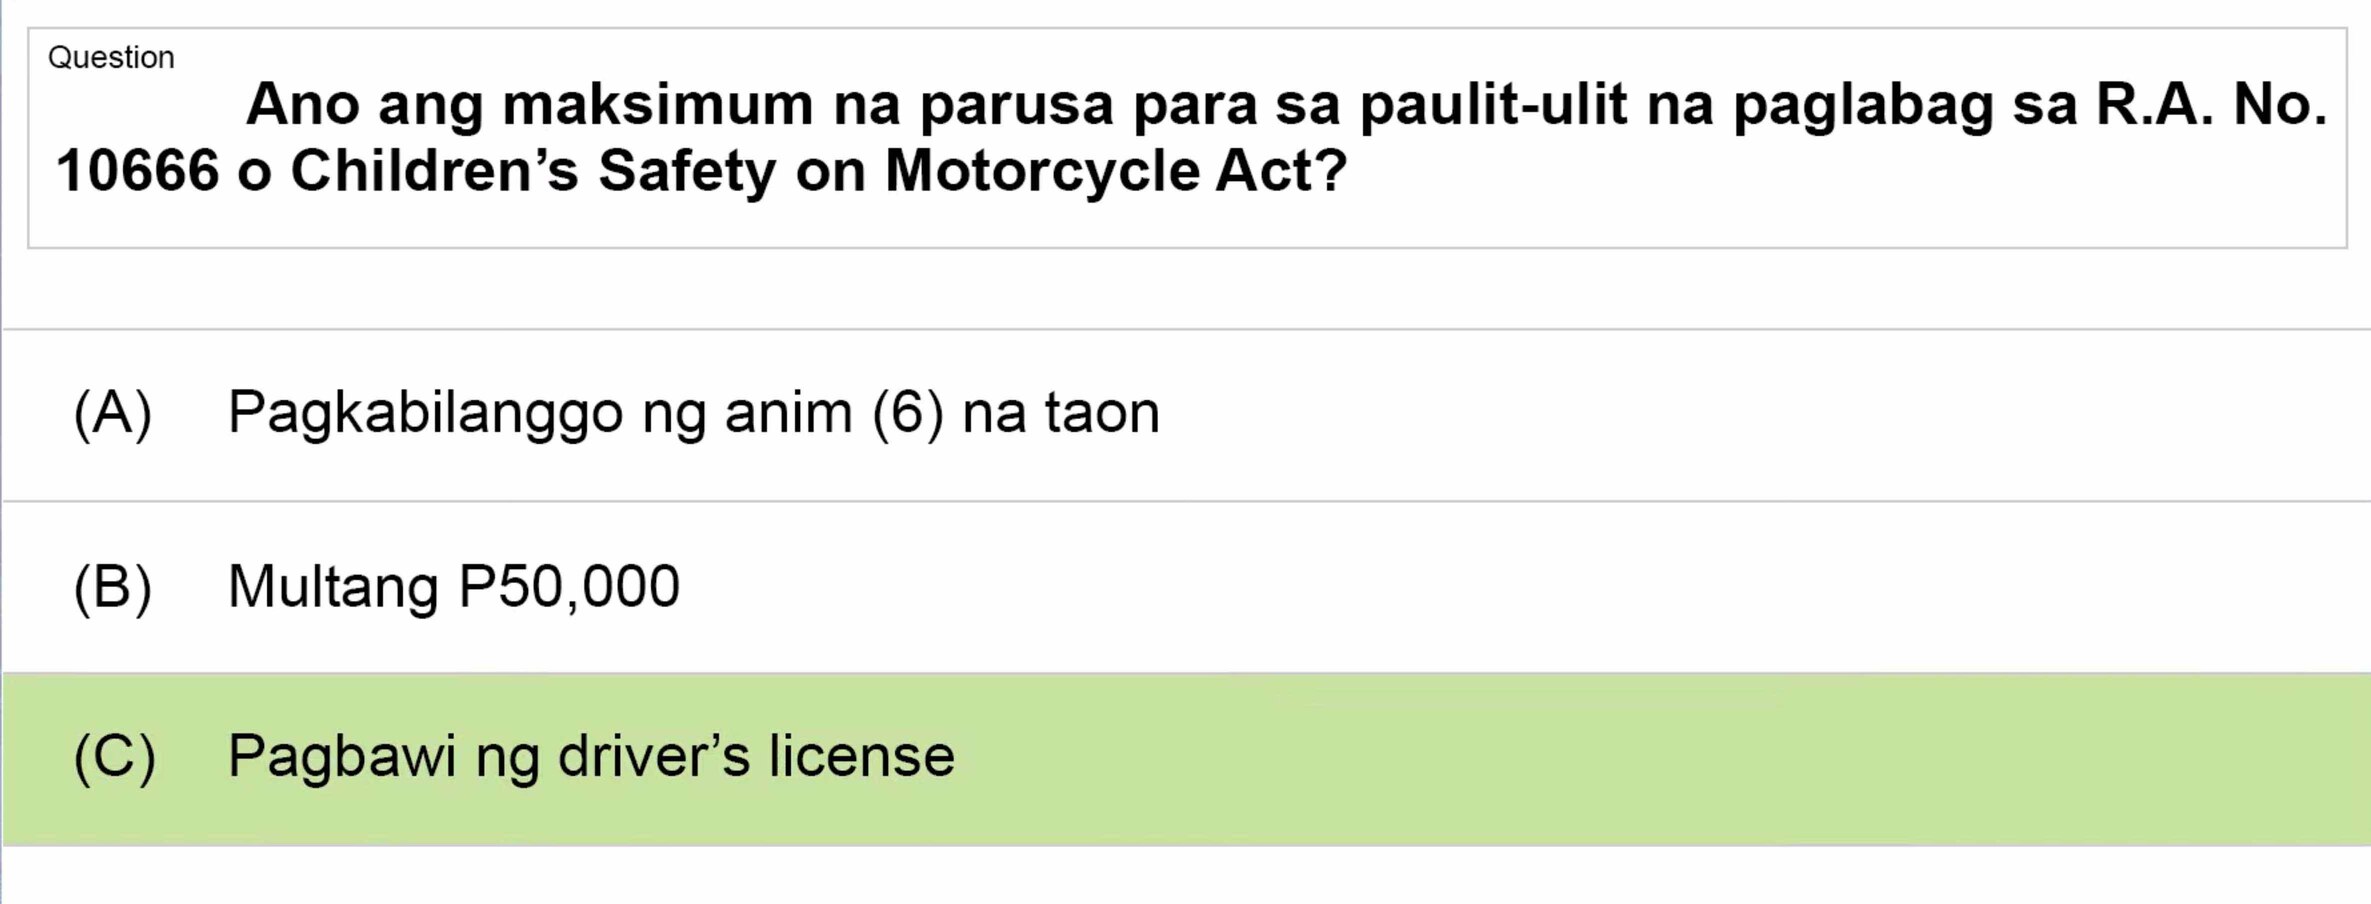 LTO Tagalog non professional exam reviewer motorcycle 1 (12)